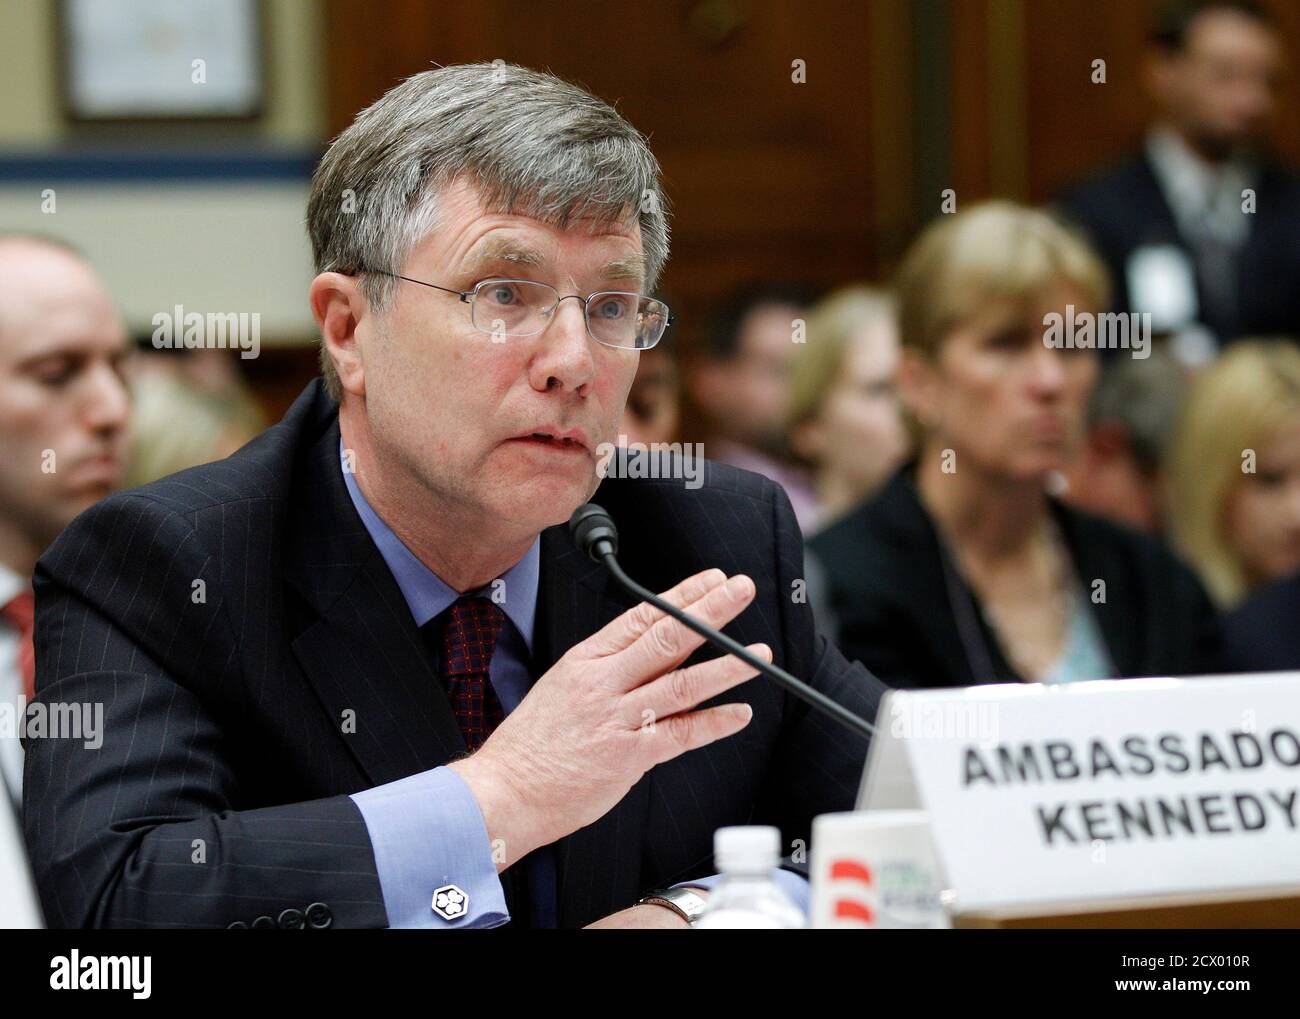 Secretary for Management at the U.S. Department of State Patrick Kennedy testifies on Capitol Hill in Washington D.C. about the September 11, 2012 attack on the U.S. Consulate in Benghazi, October 10, 2012. Diplomatic security in Libya was drawn down ahead of last month's fatal attack on the U.S. mission in Benghazi and U.S. officials did not have enough protection, former head of a U.S. security team in Libya, Lieutenant Colonel Andrew Wood, told lawmakers on Wednesday. REUTERS/Jose Luis Magana (UNITED STATES - Tags: POLITICS CIVIL UNREST) Stock Photo